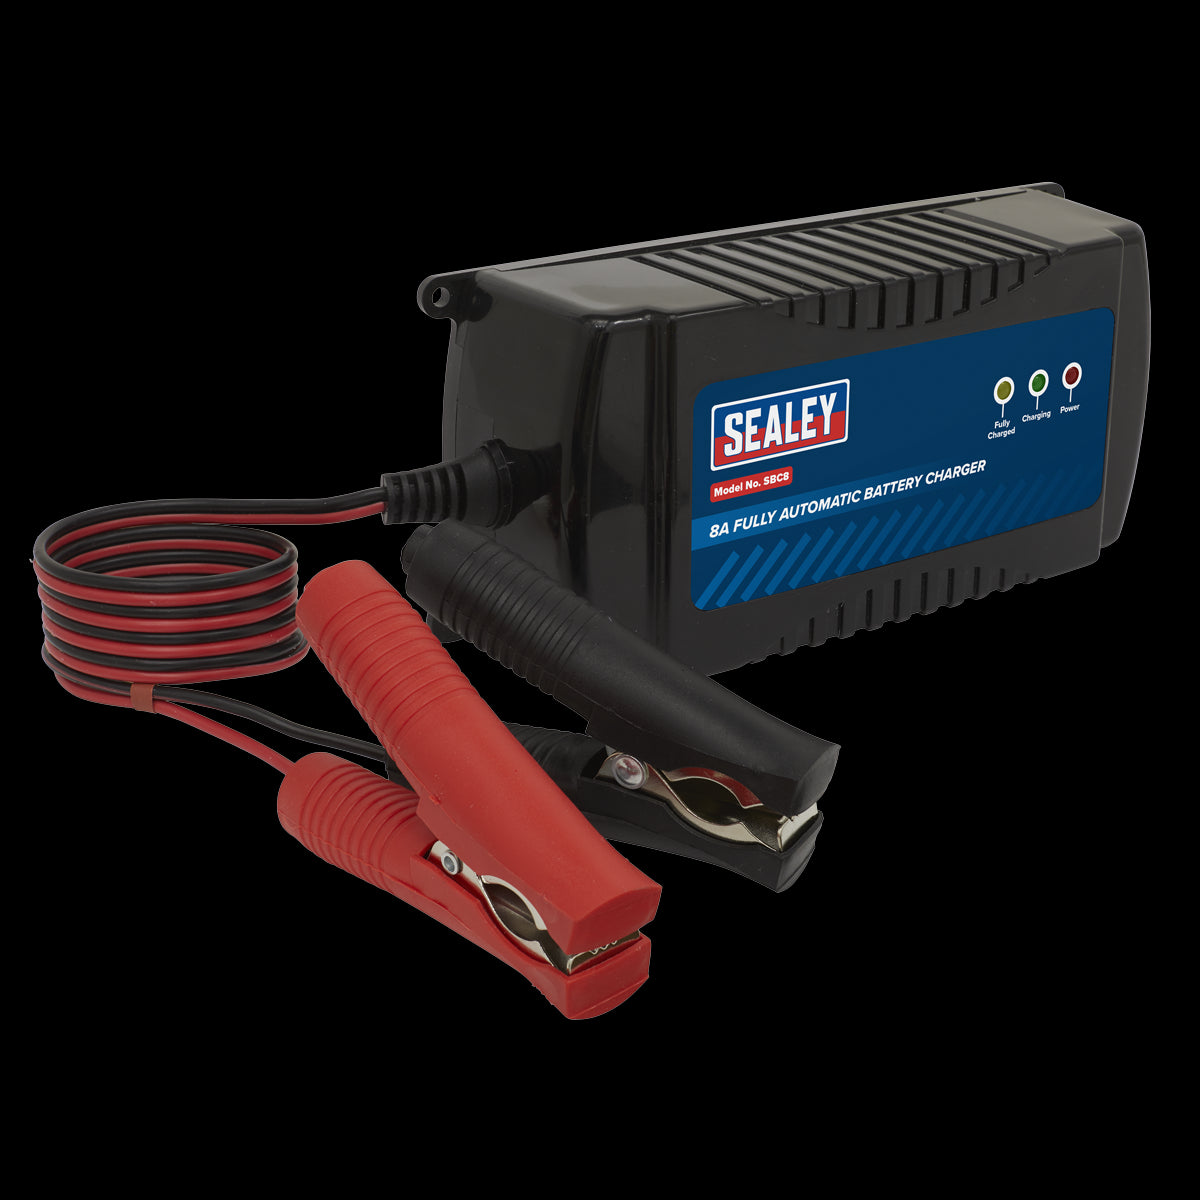 Sealey Battery Maintainer Charger 12V 8A Fully Automatic